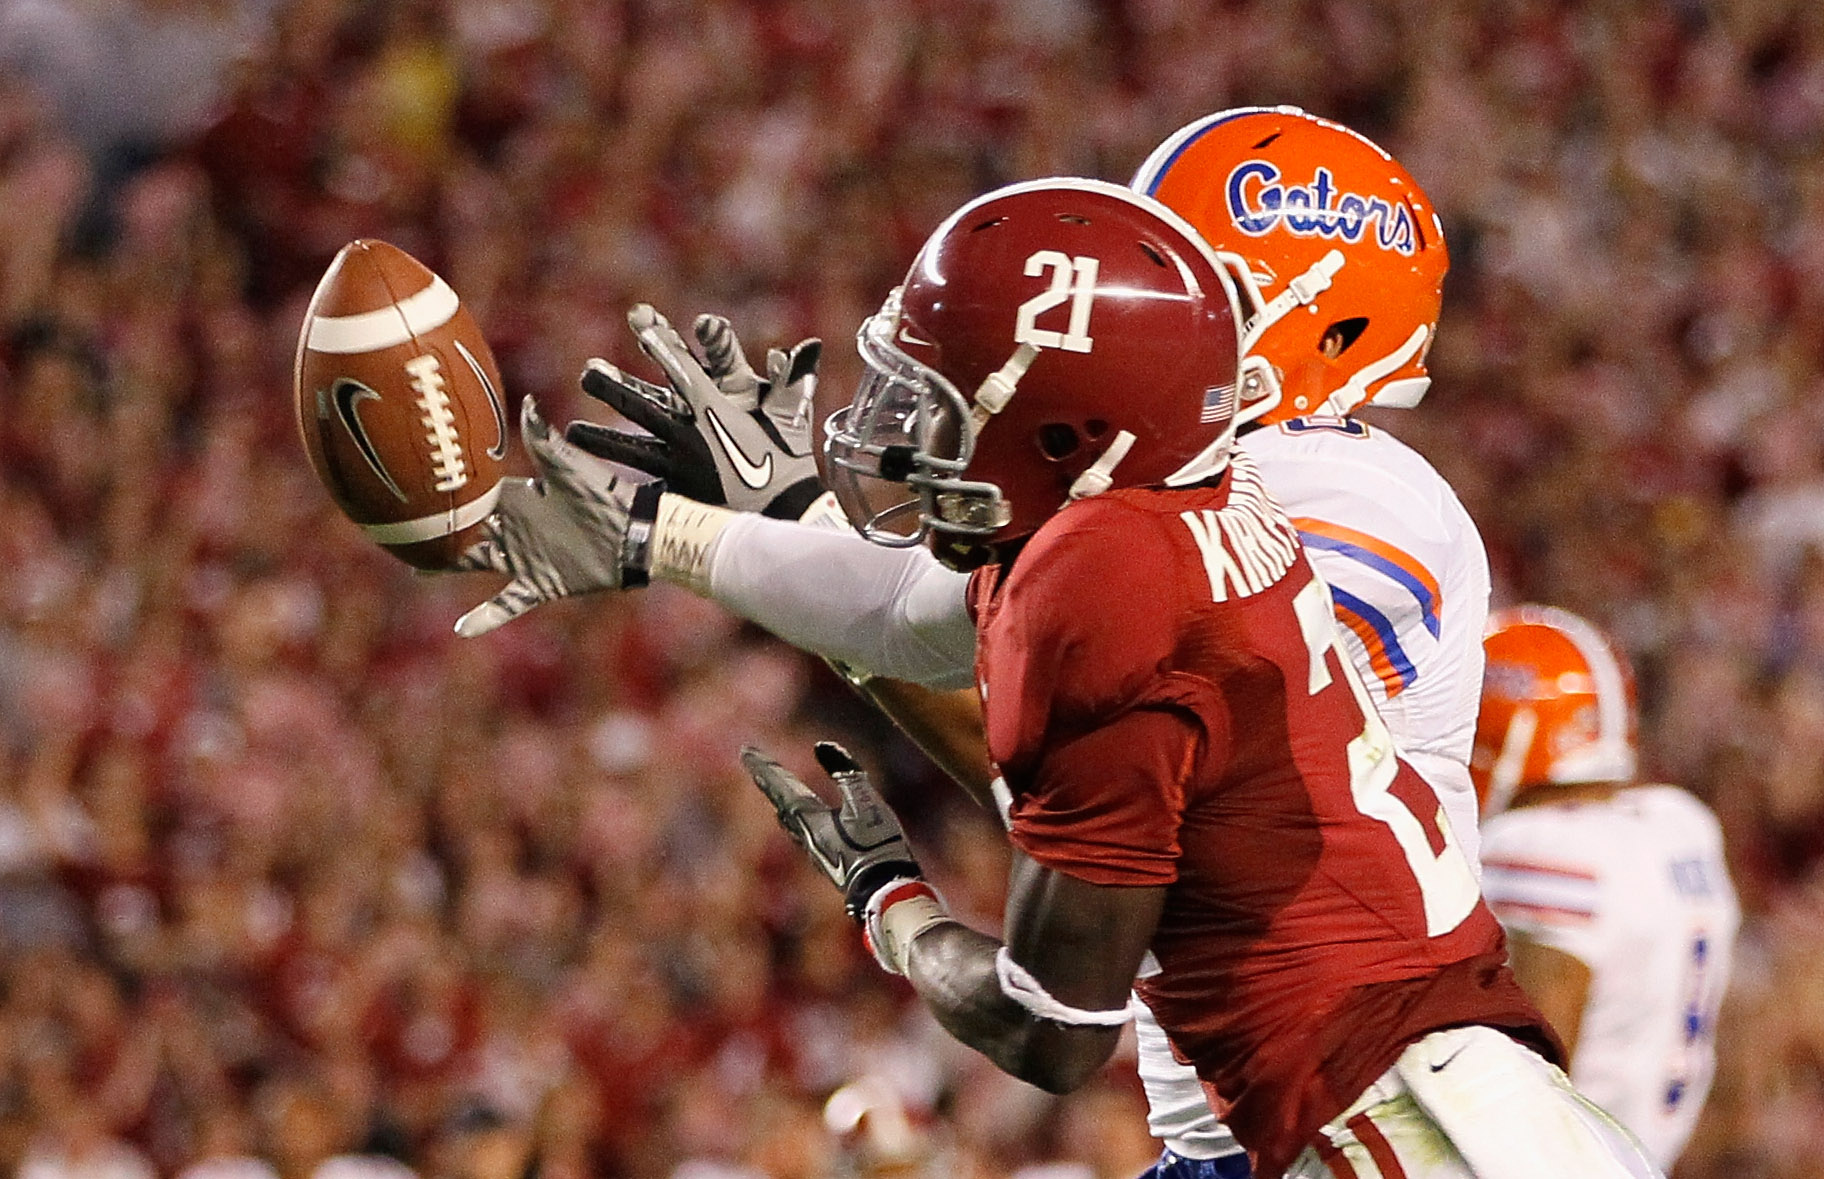 TUSCALOOSA, AL - OCTOBER 02:  Dre Kirkpatrick #21 of the Alabama Crimson Tide intercepts a pass intended for Trey Burton #8 of the Florida Gators at Bryant-Denny Stadium on October 2, 2010 in Tuscaloosa, Alabama.  (Photo by Kevin C. Cox/Getty Images)